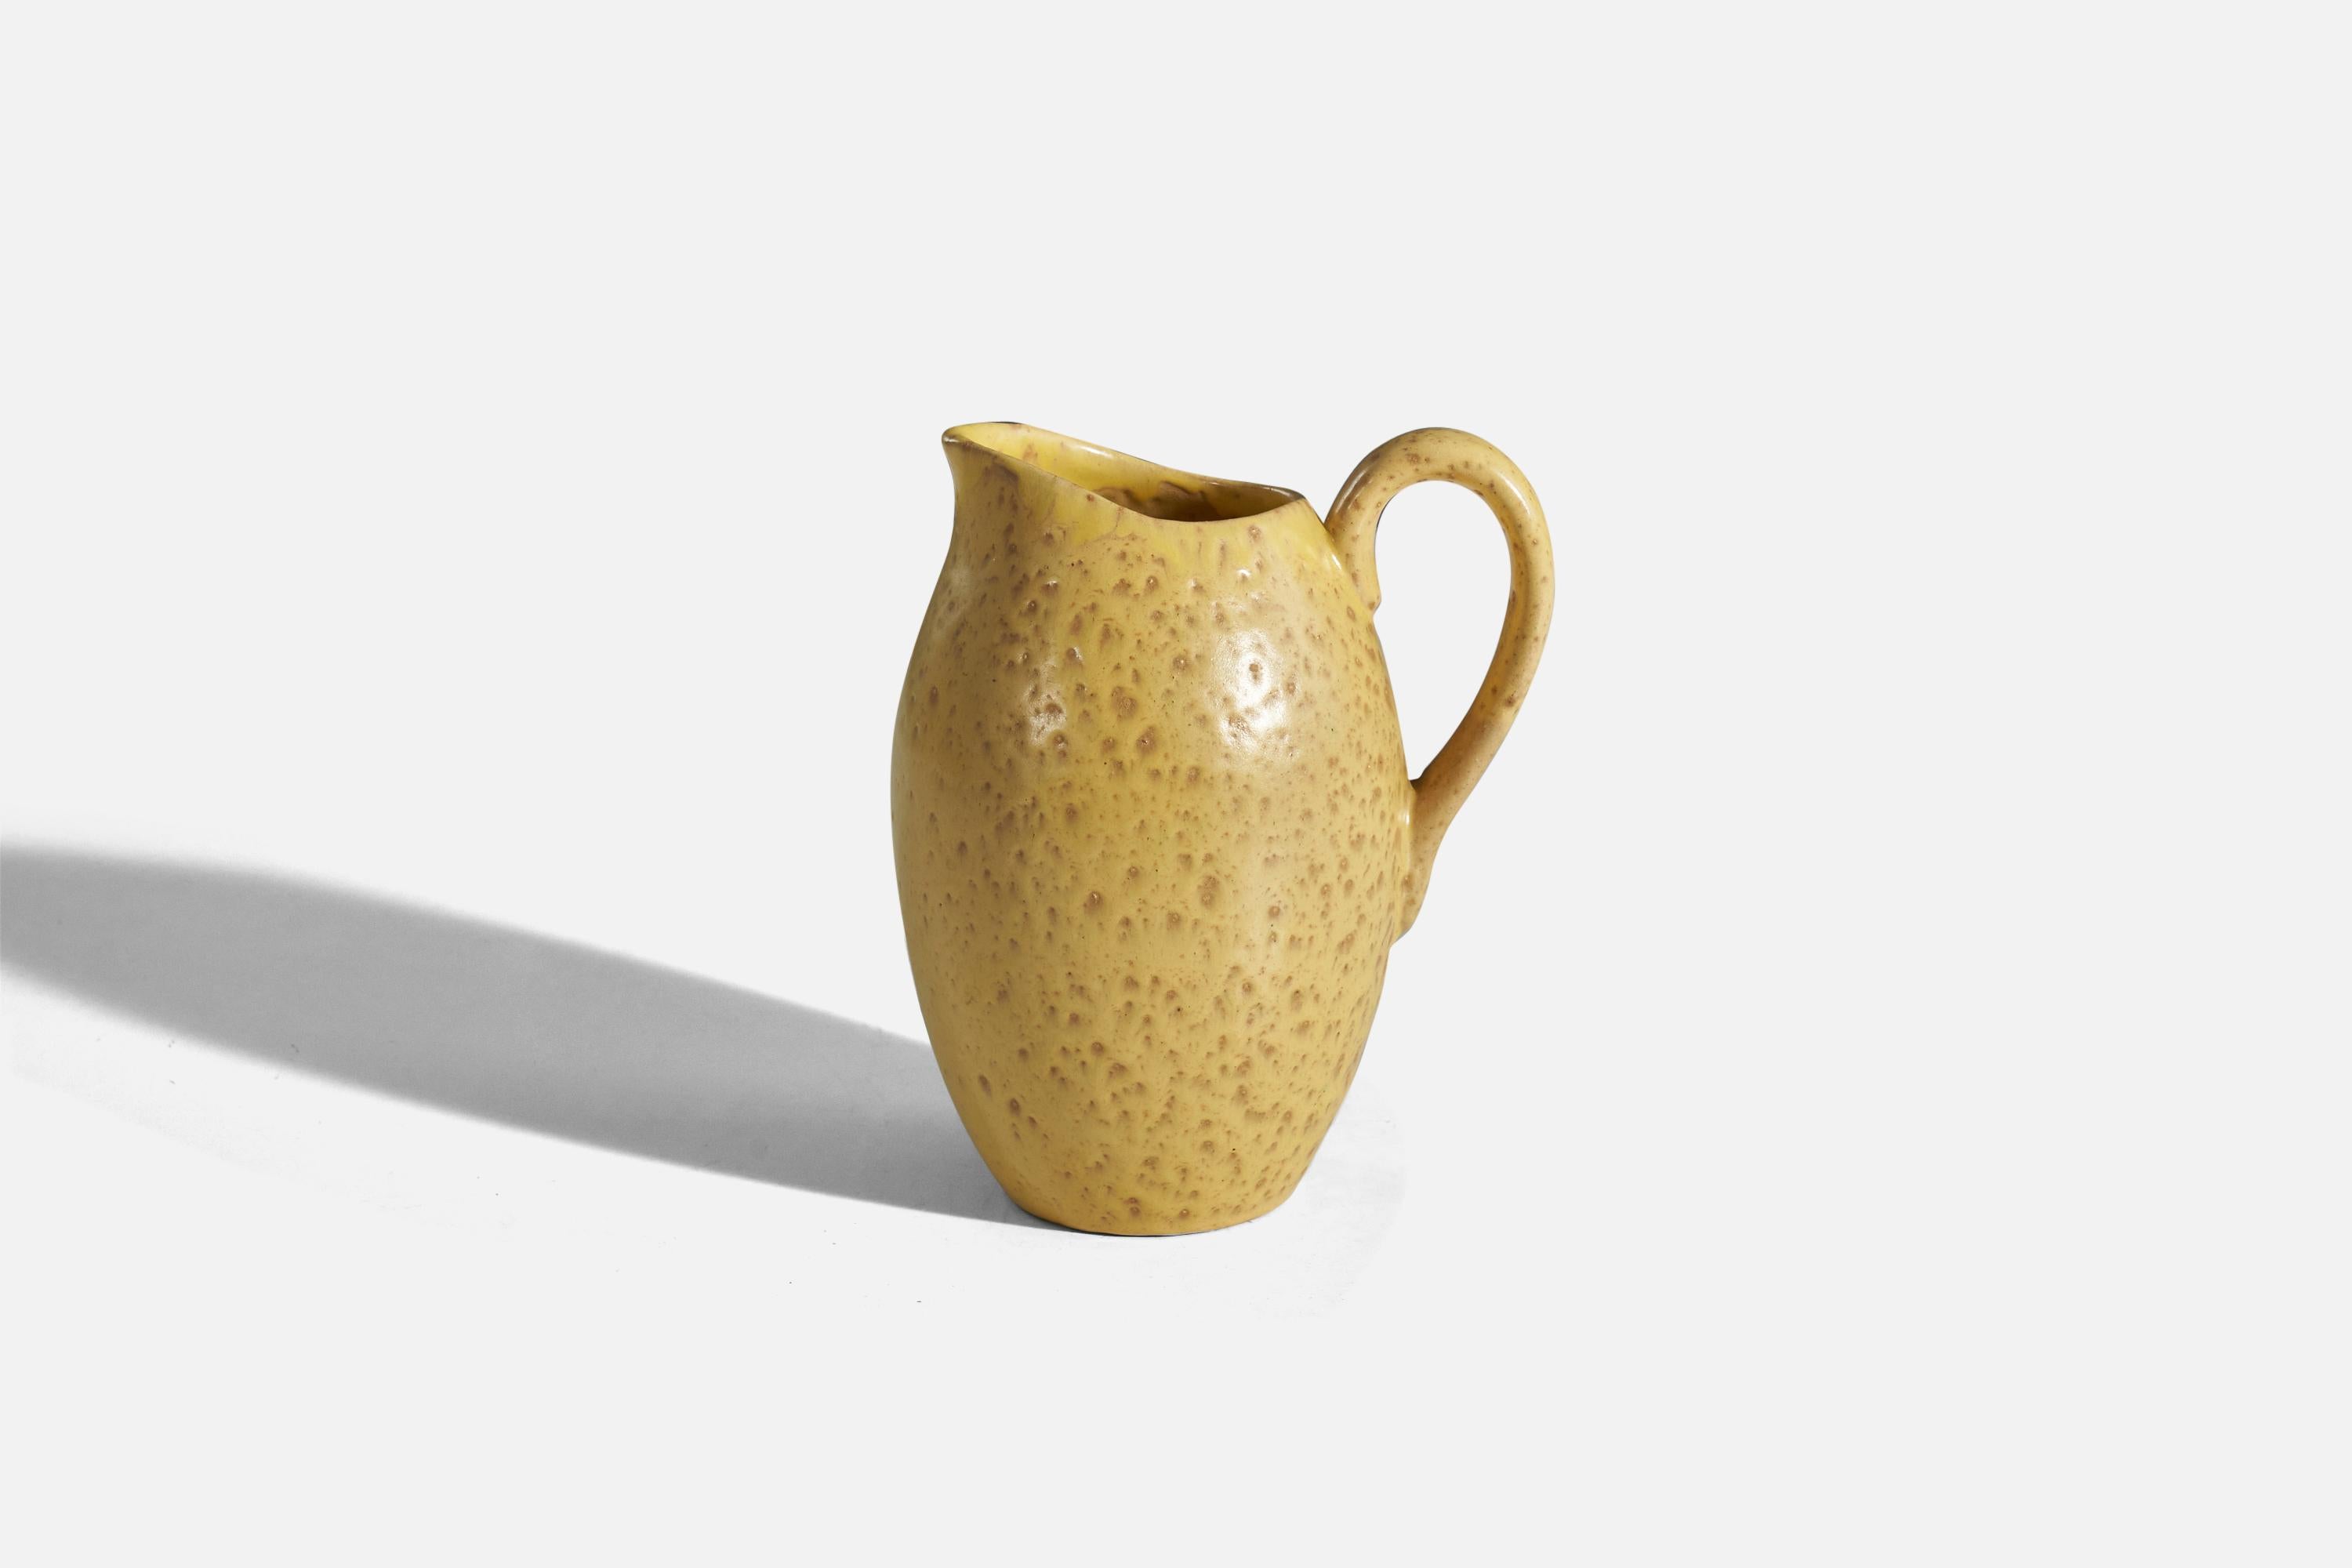 A yellow, glazed earthenware vase or pitcher designed and produced by Nittsjö, Sweden, 1940s.
 